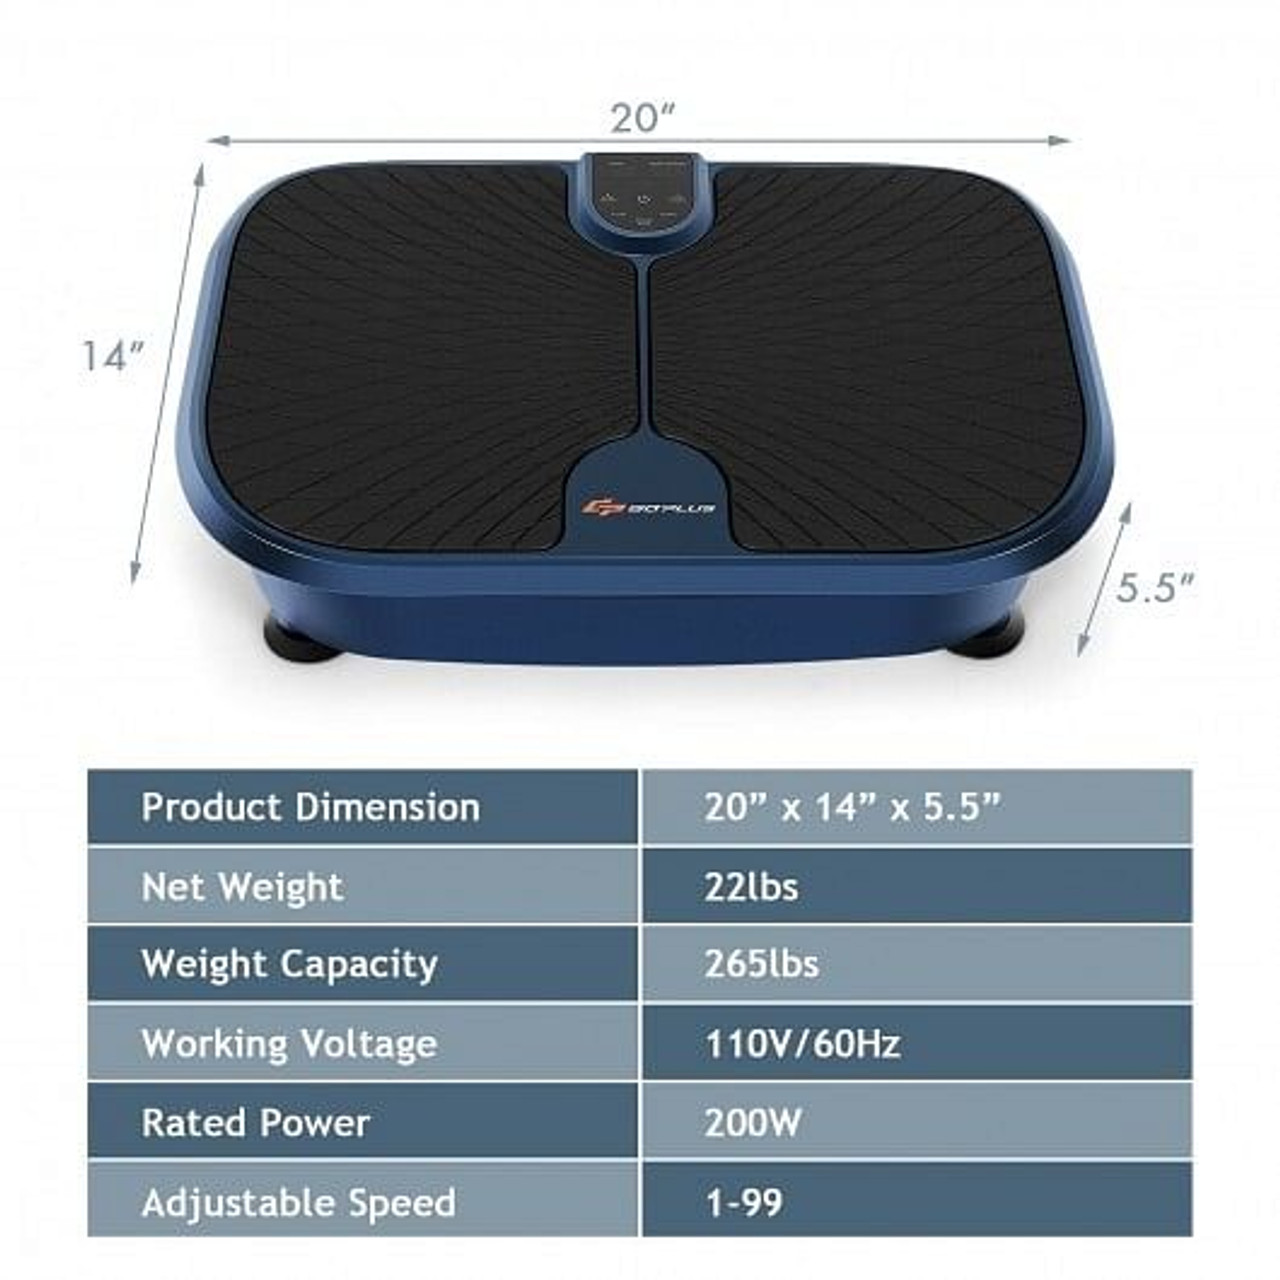 Mini Vibration Fitness Plate Machine with Remote Control and Loop Bands-Blue